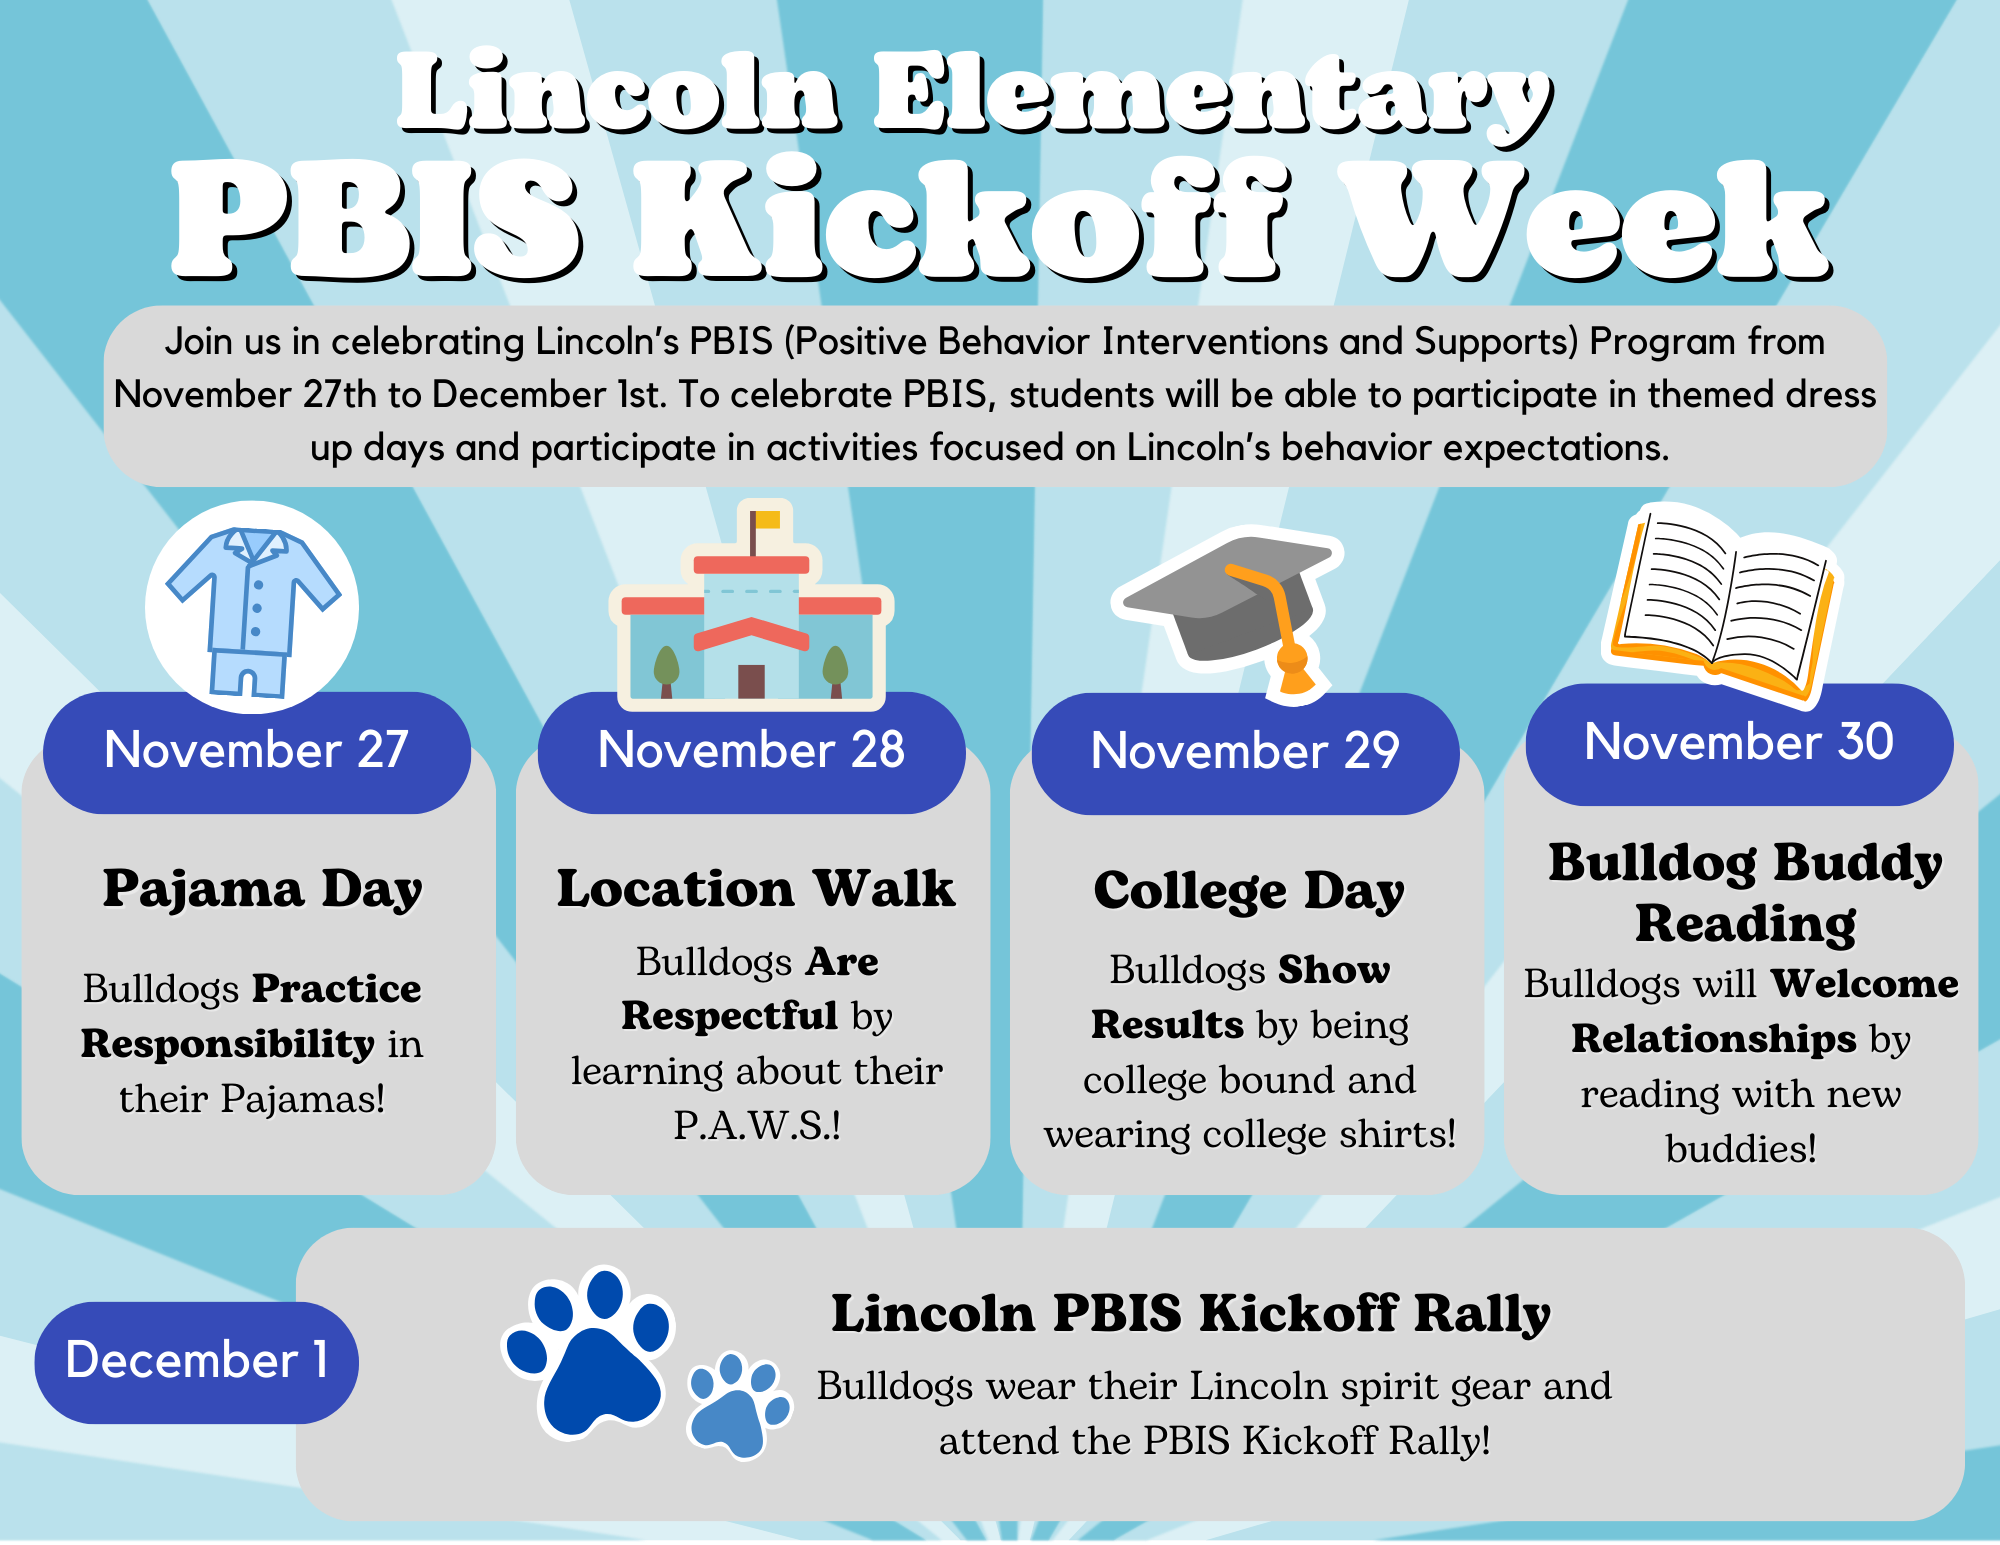 P.B.I.S Lincoln Elementary  PBIS Kickoff Week